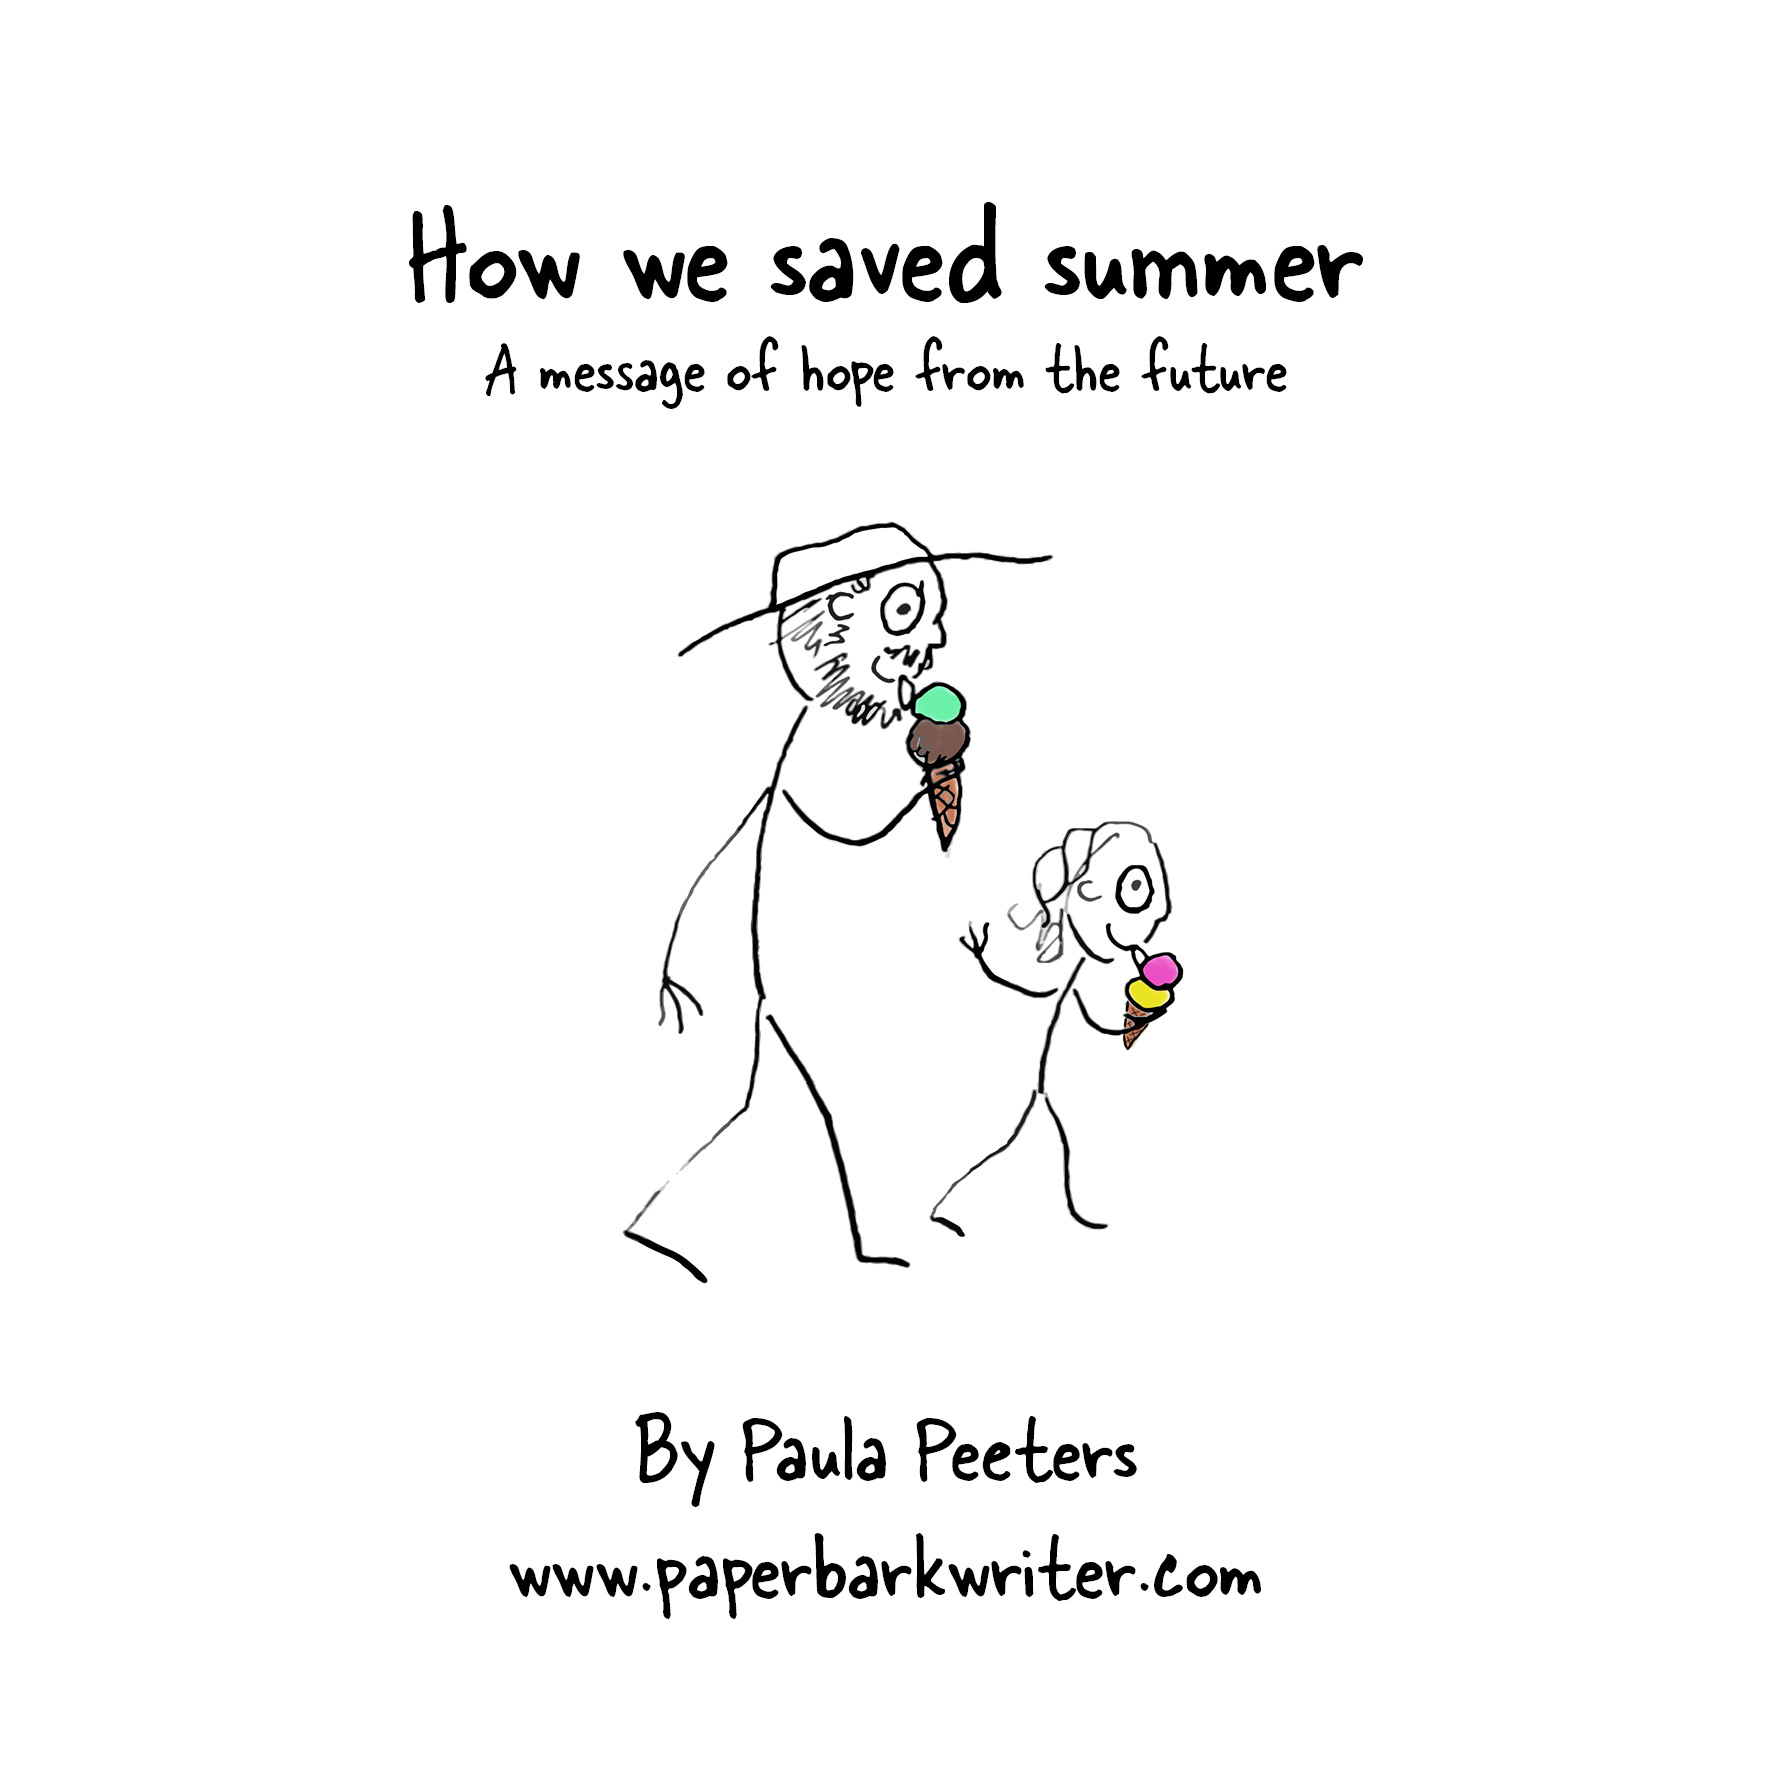 How we saved summer